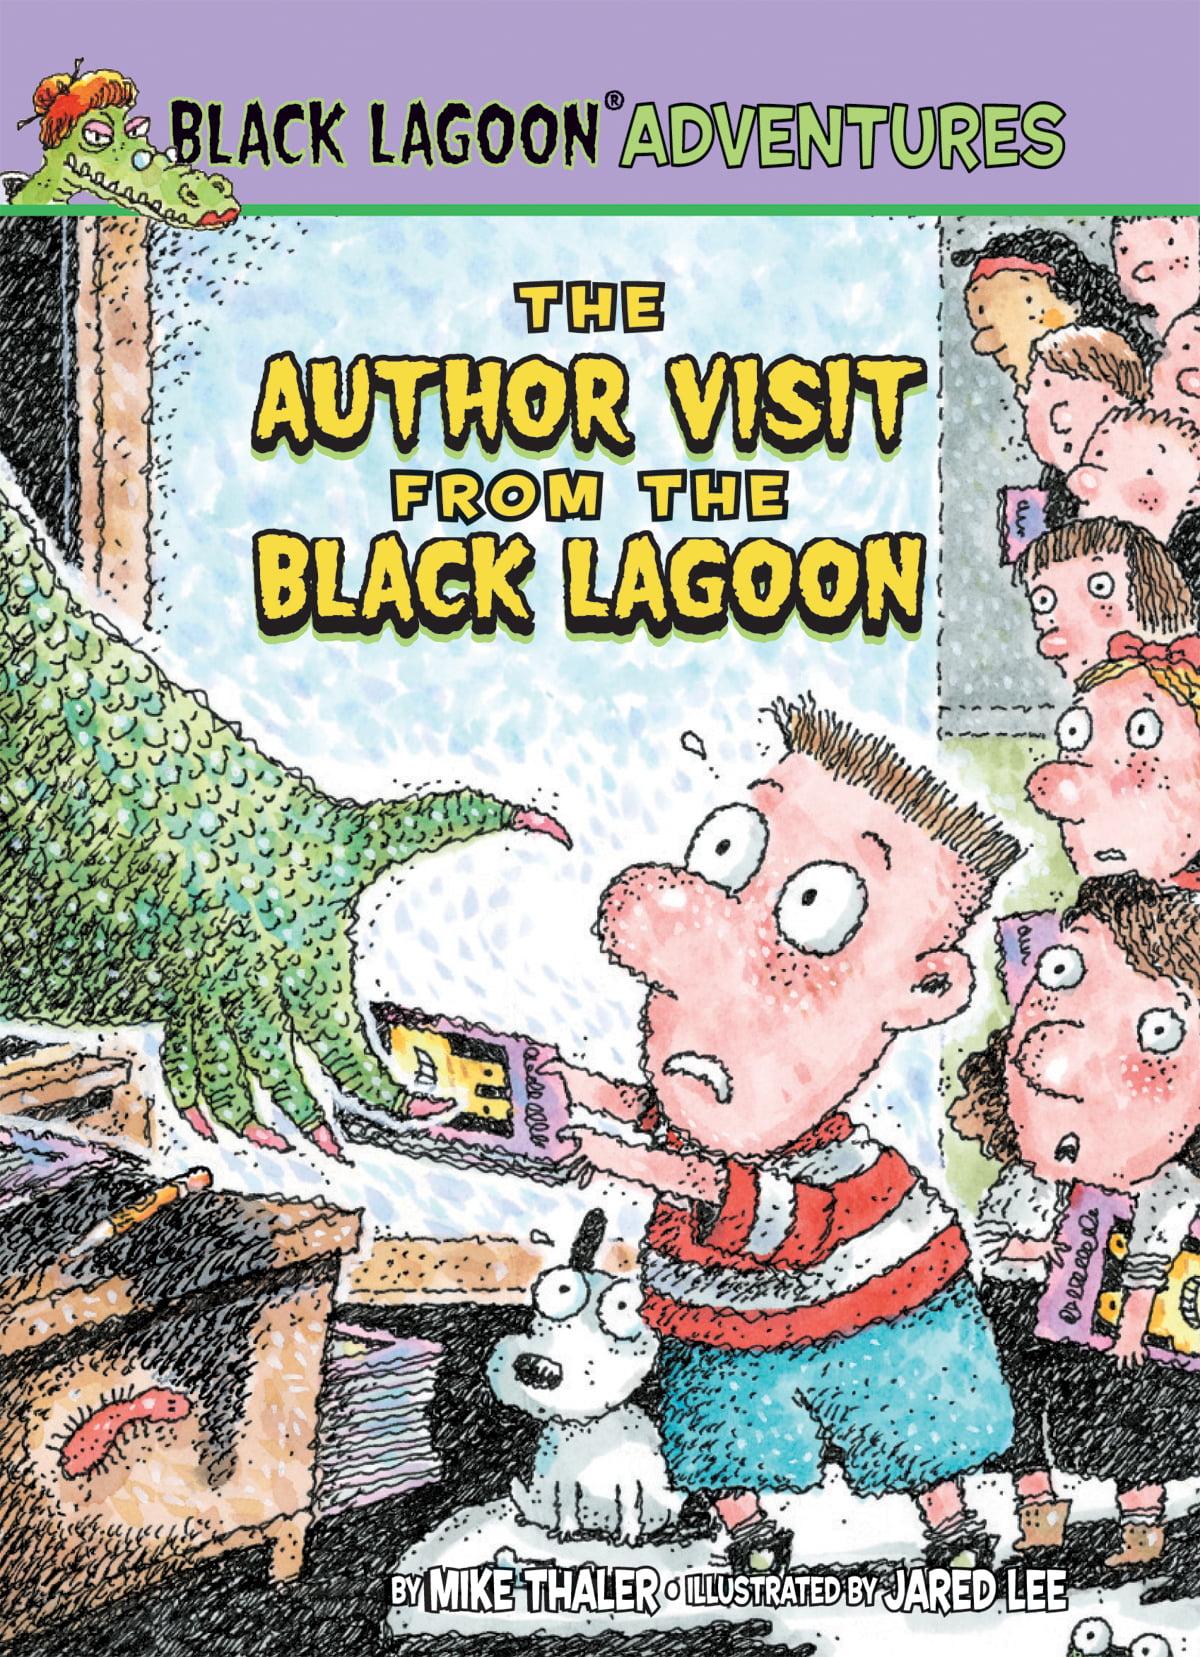 the book report from the black lagoon